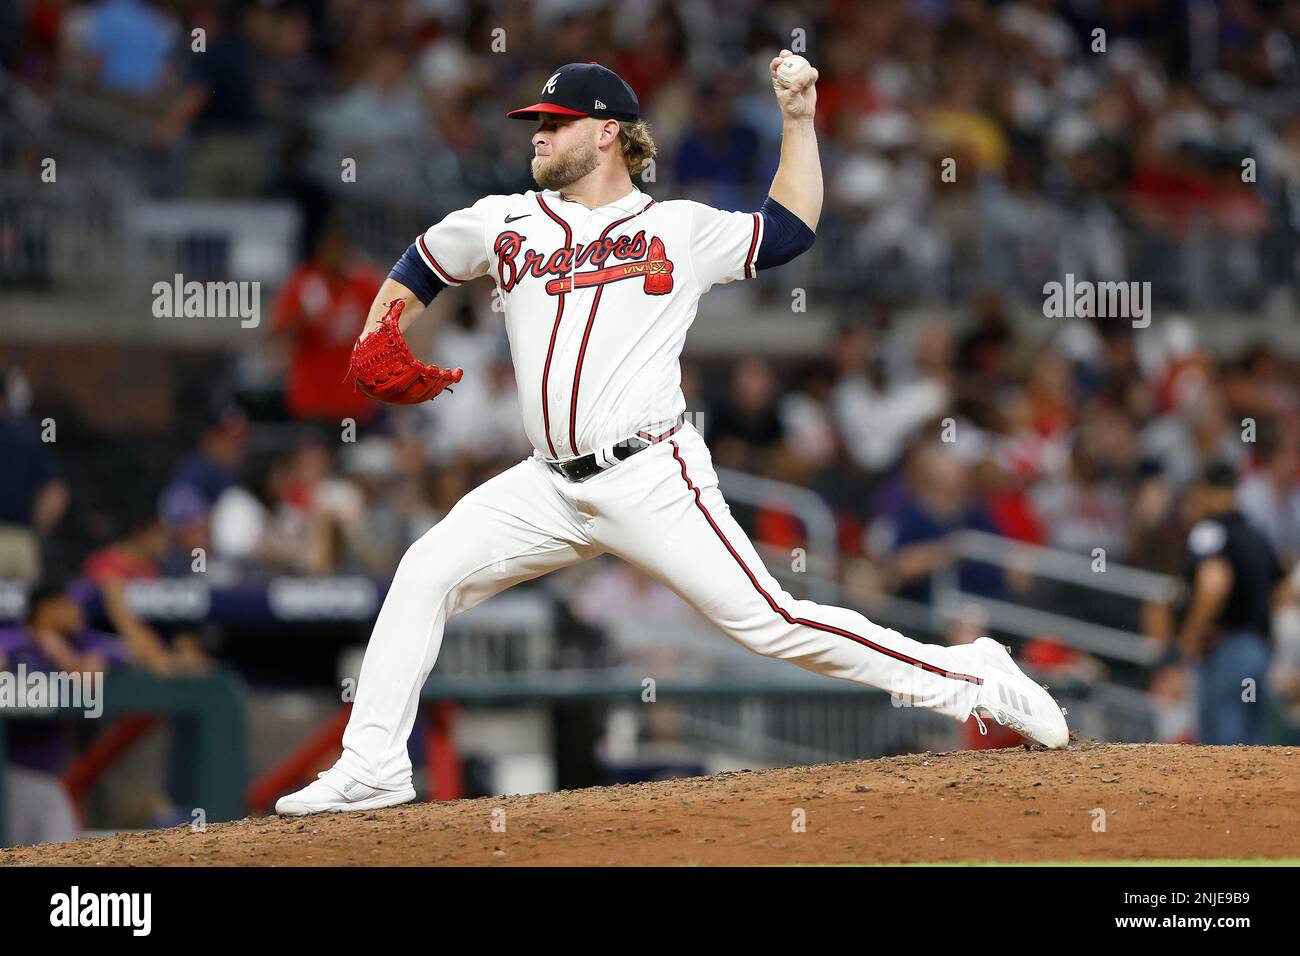 ATLANTA, GA - AUGUST 31: Atlanta Braves relief pitcher A.J. Minter (33)  delivers a pitch during the Wednesday evening MLB game between the Atlanta  Braves and the Colorado Rockies on August 31